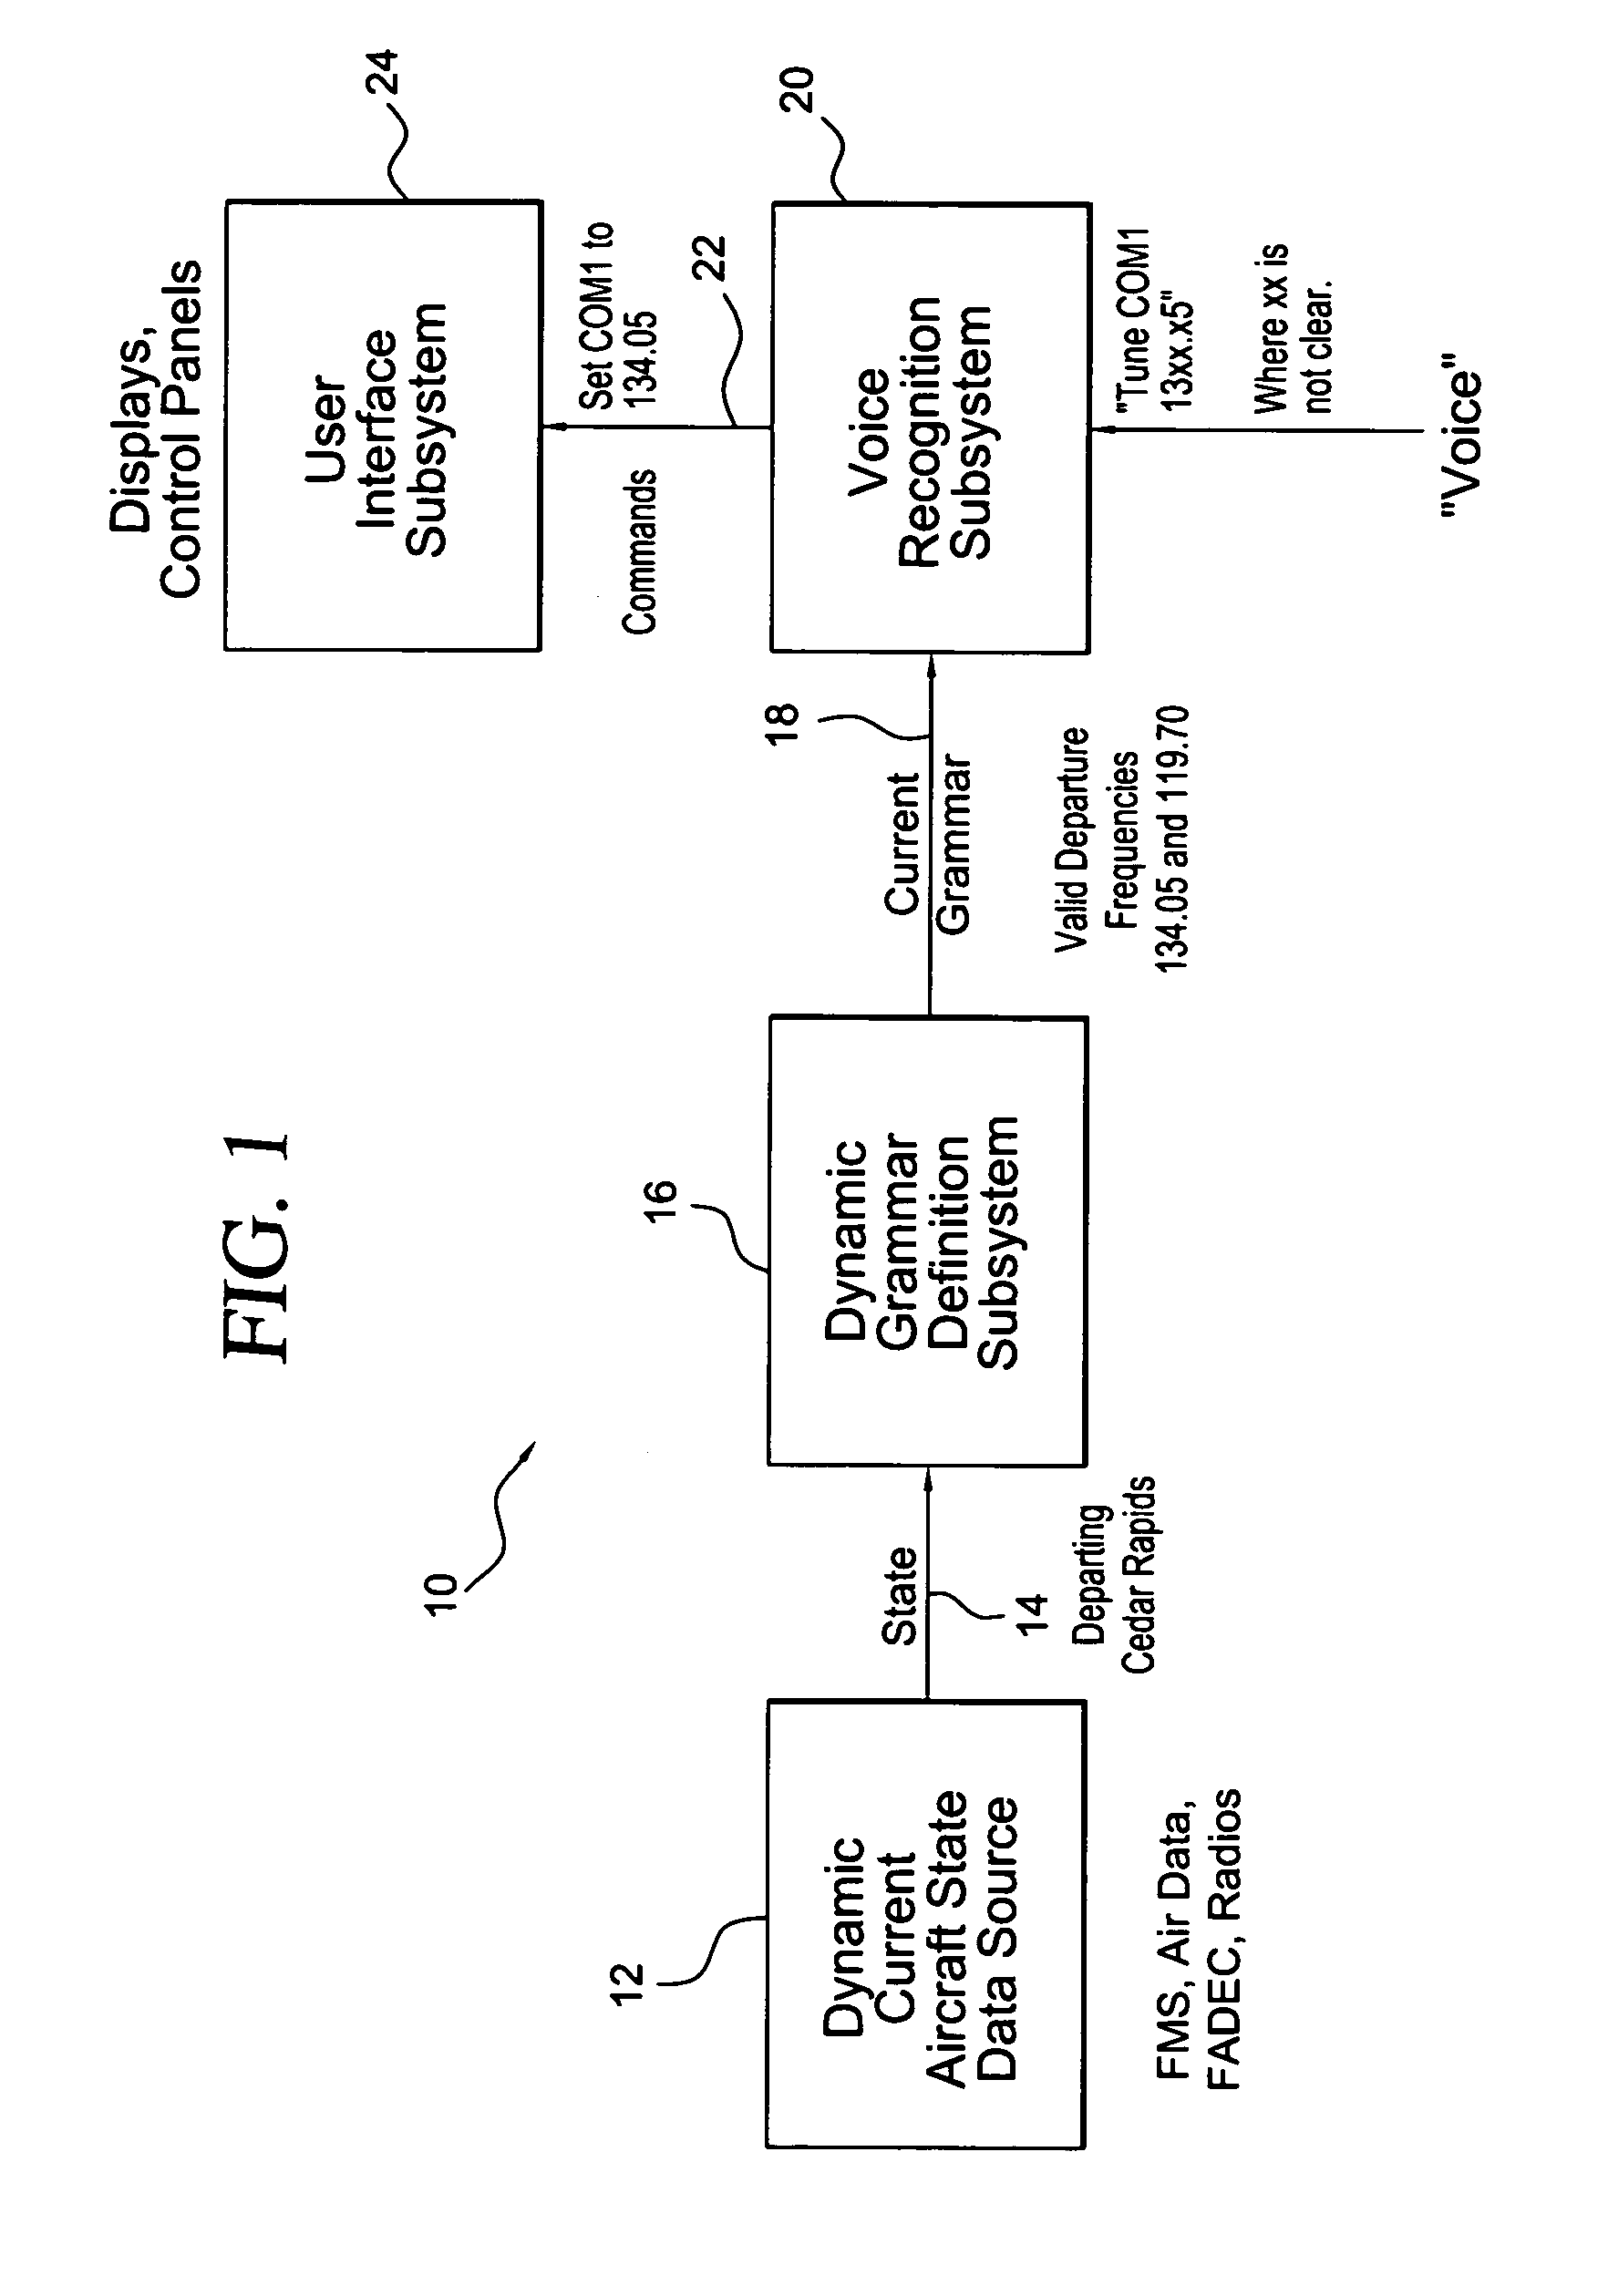 Avionics system for providing commands based on aircraft state